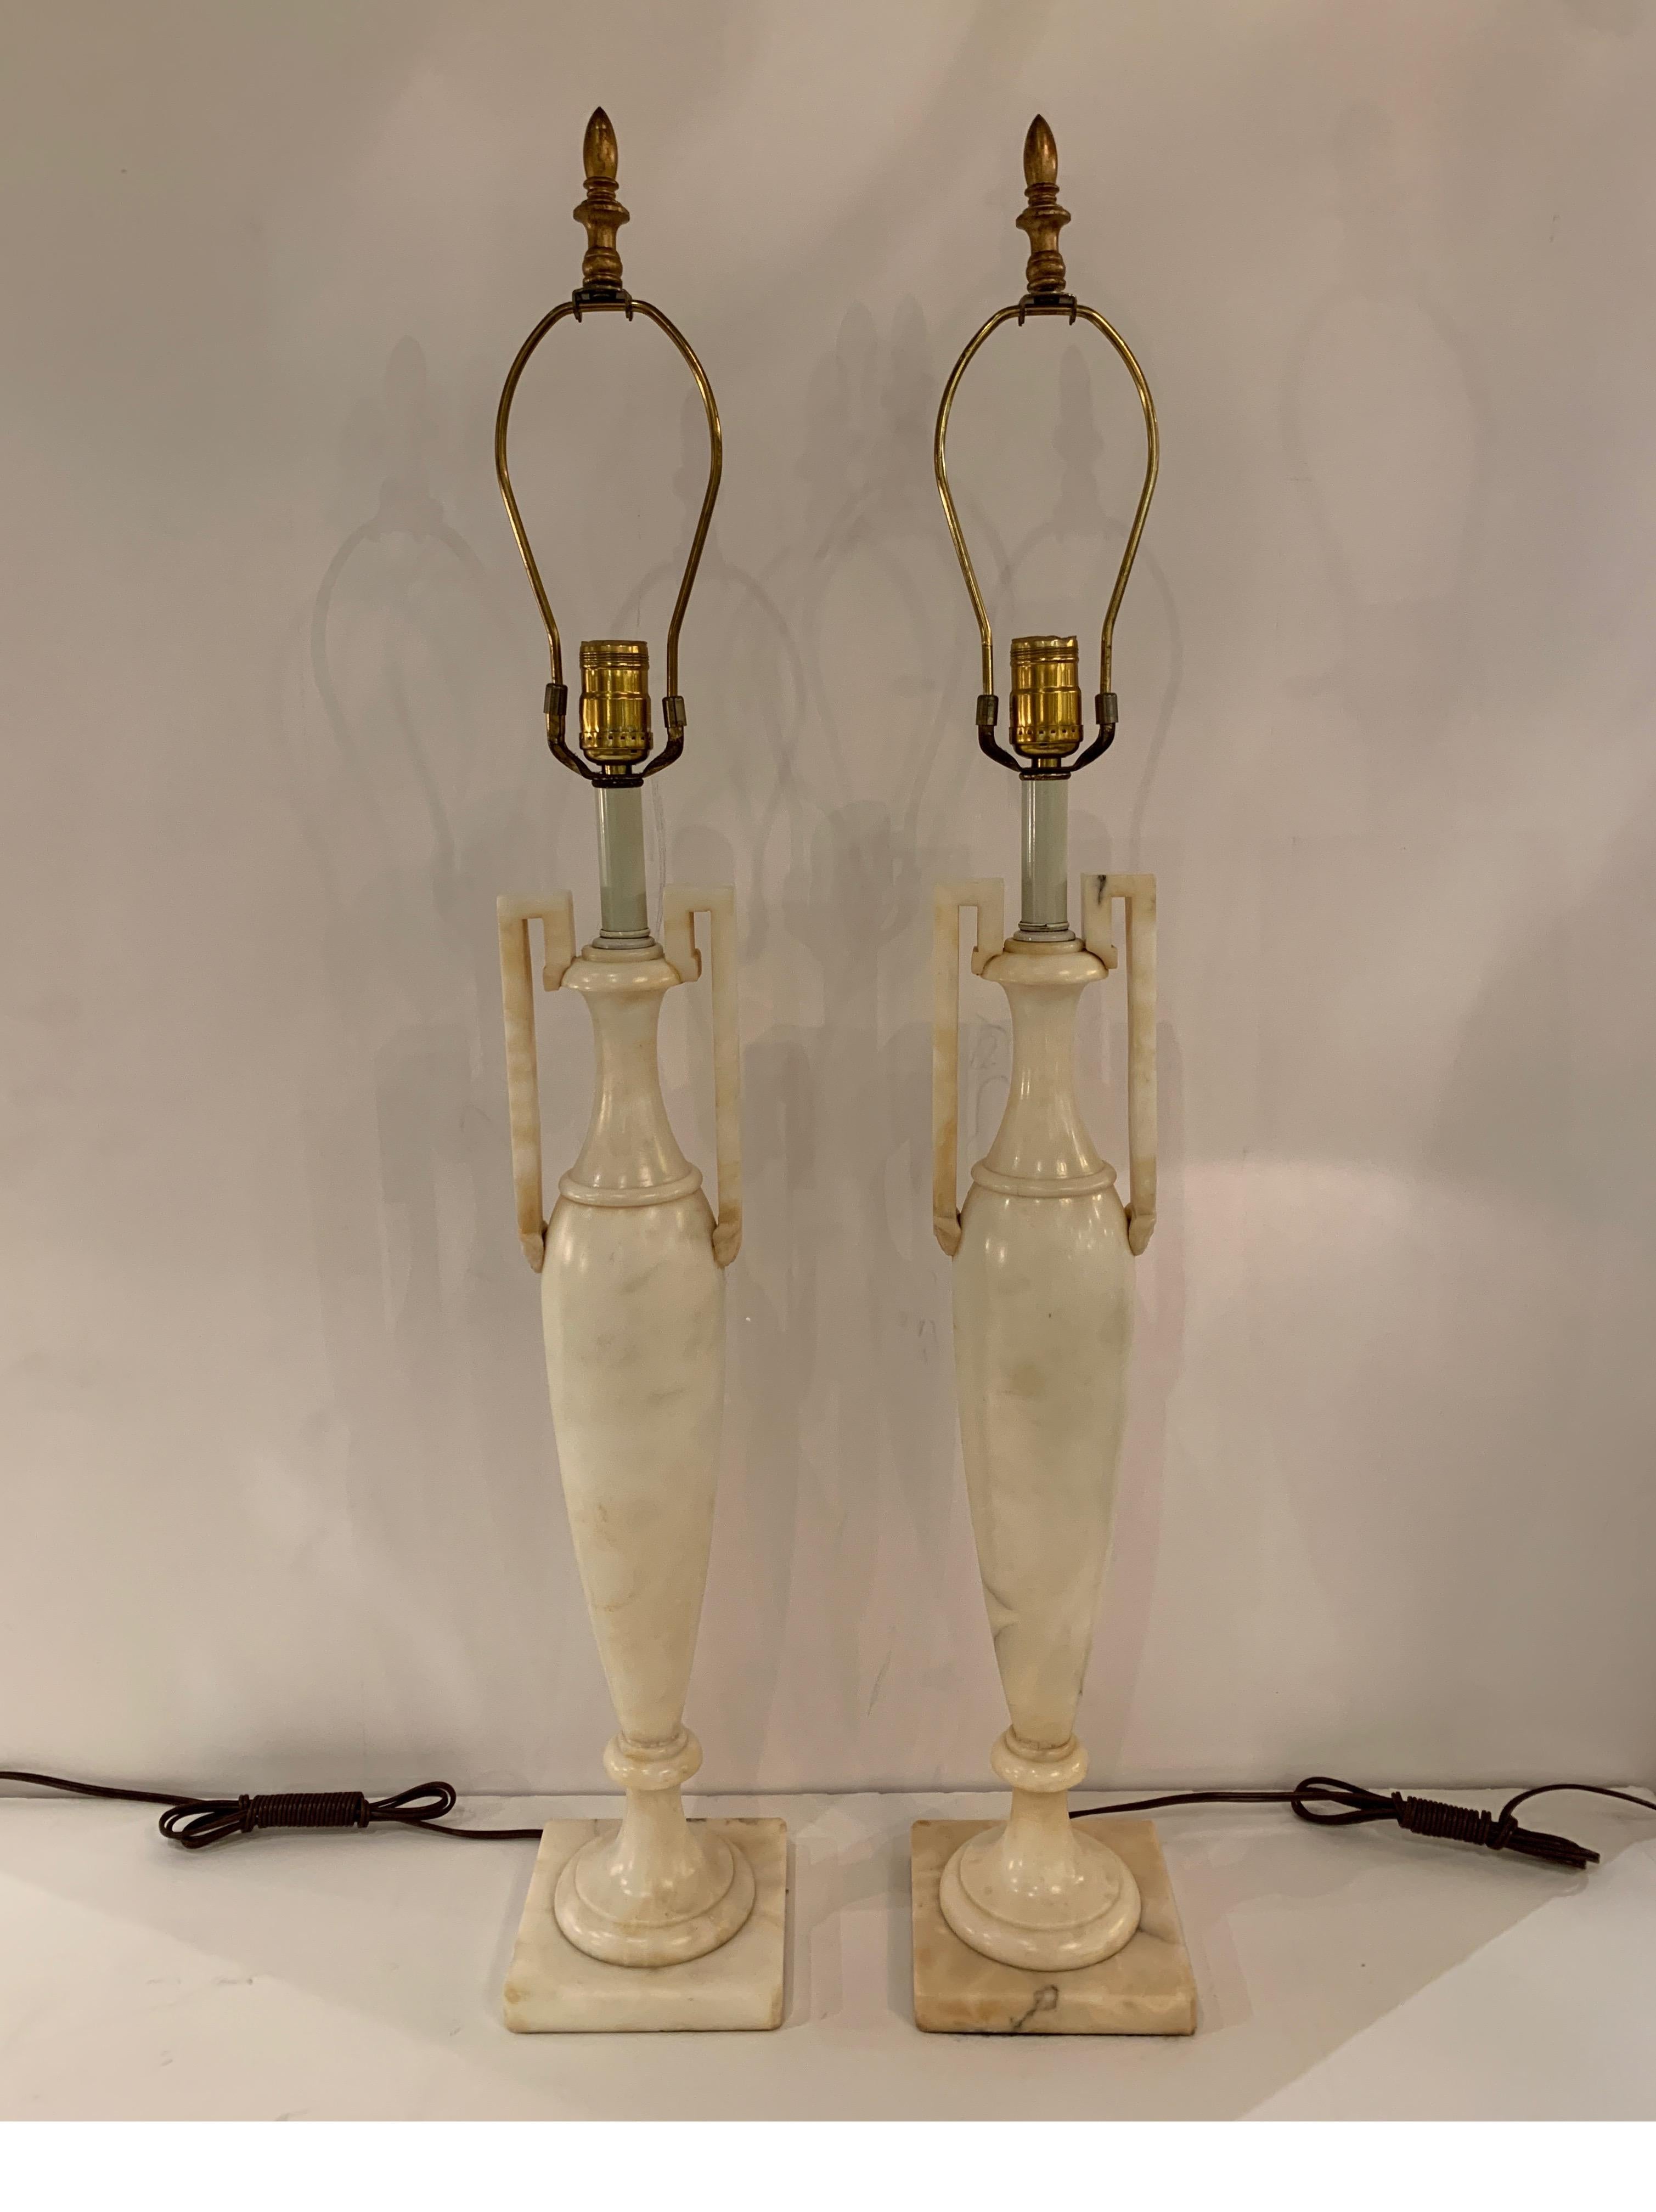 Chic pair of neoclassical marble urn lamps. The stylish elongated shape with a Greek style handle on each side. The shades are for photographic purposes only and not included with the lamps. Measurement without shade to the top of the lamp, 27